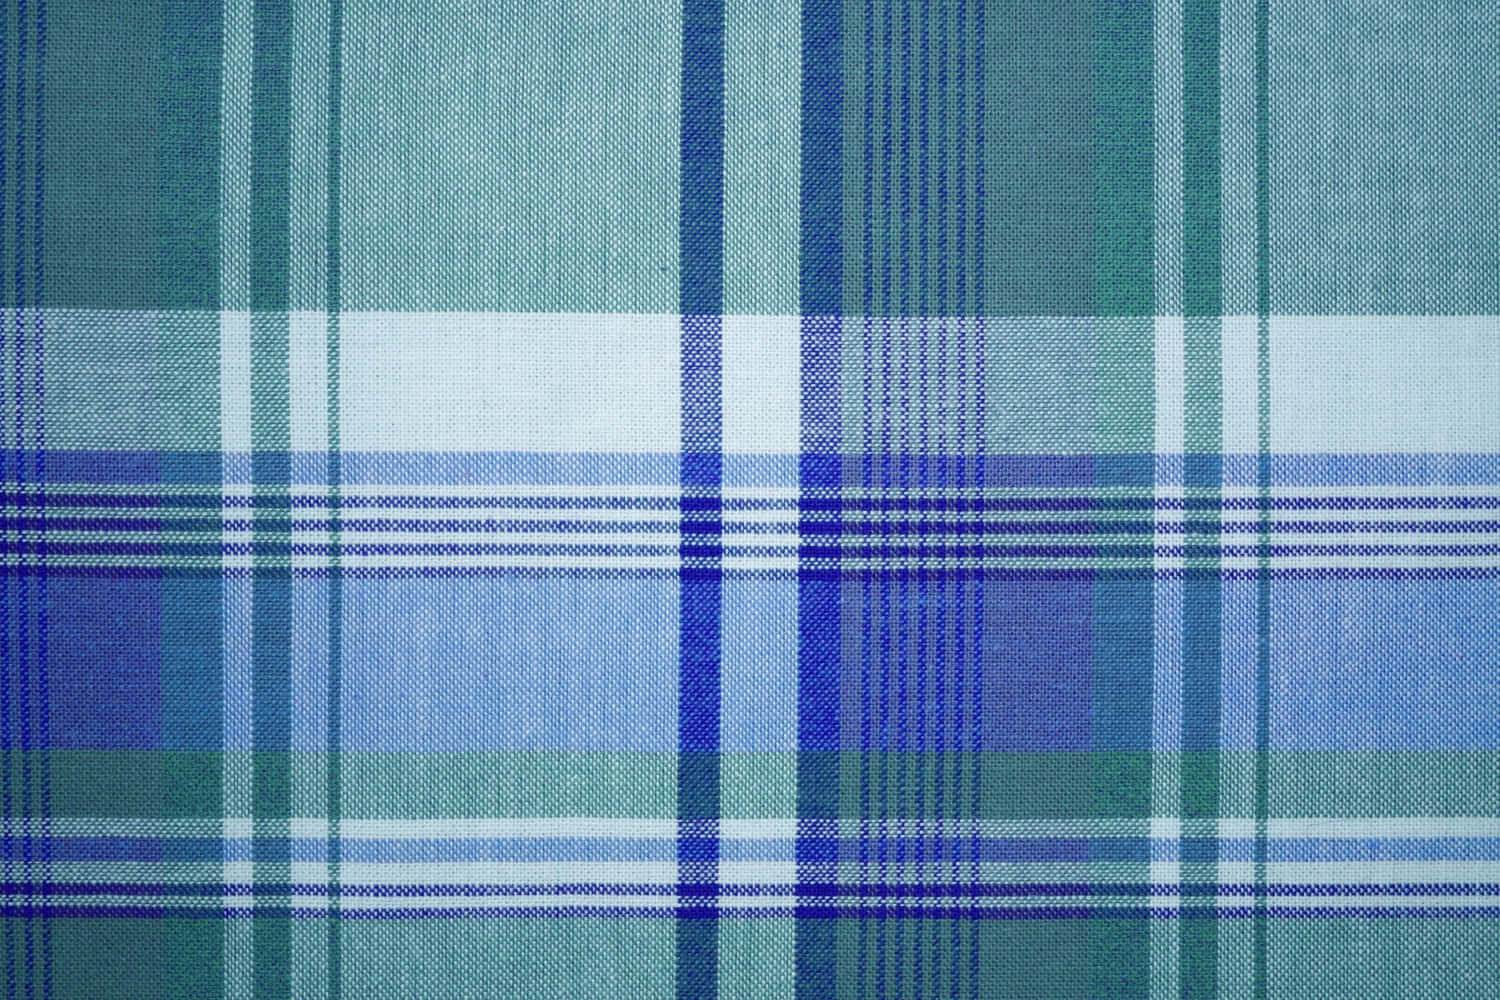 Fabric Texture Picture In Checkered Blue&Green